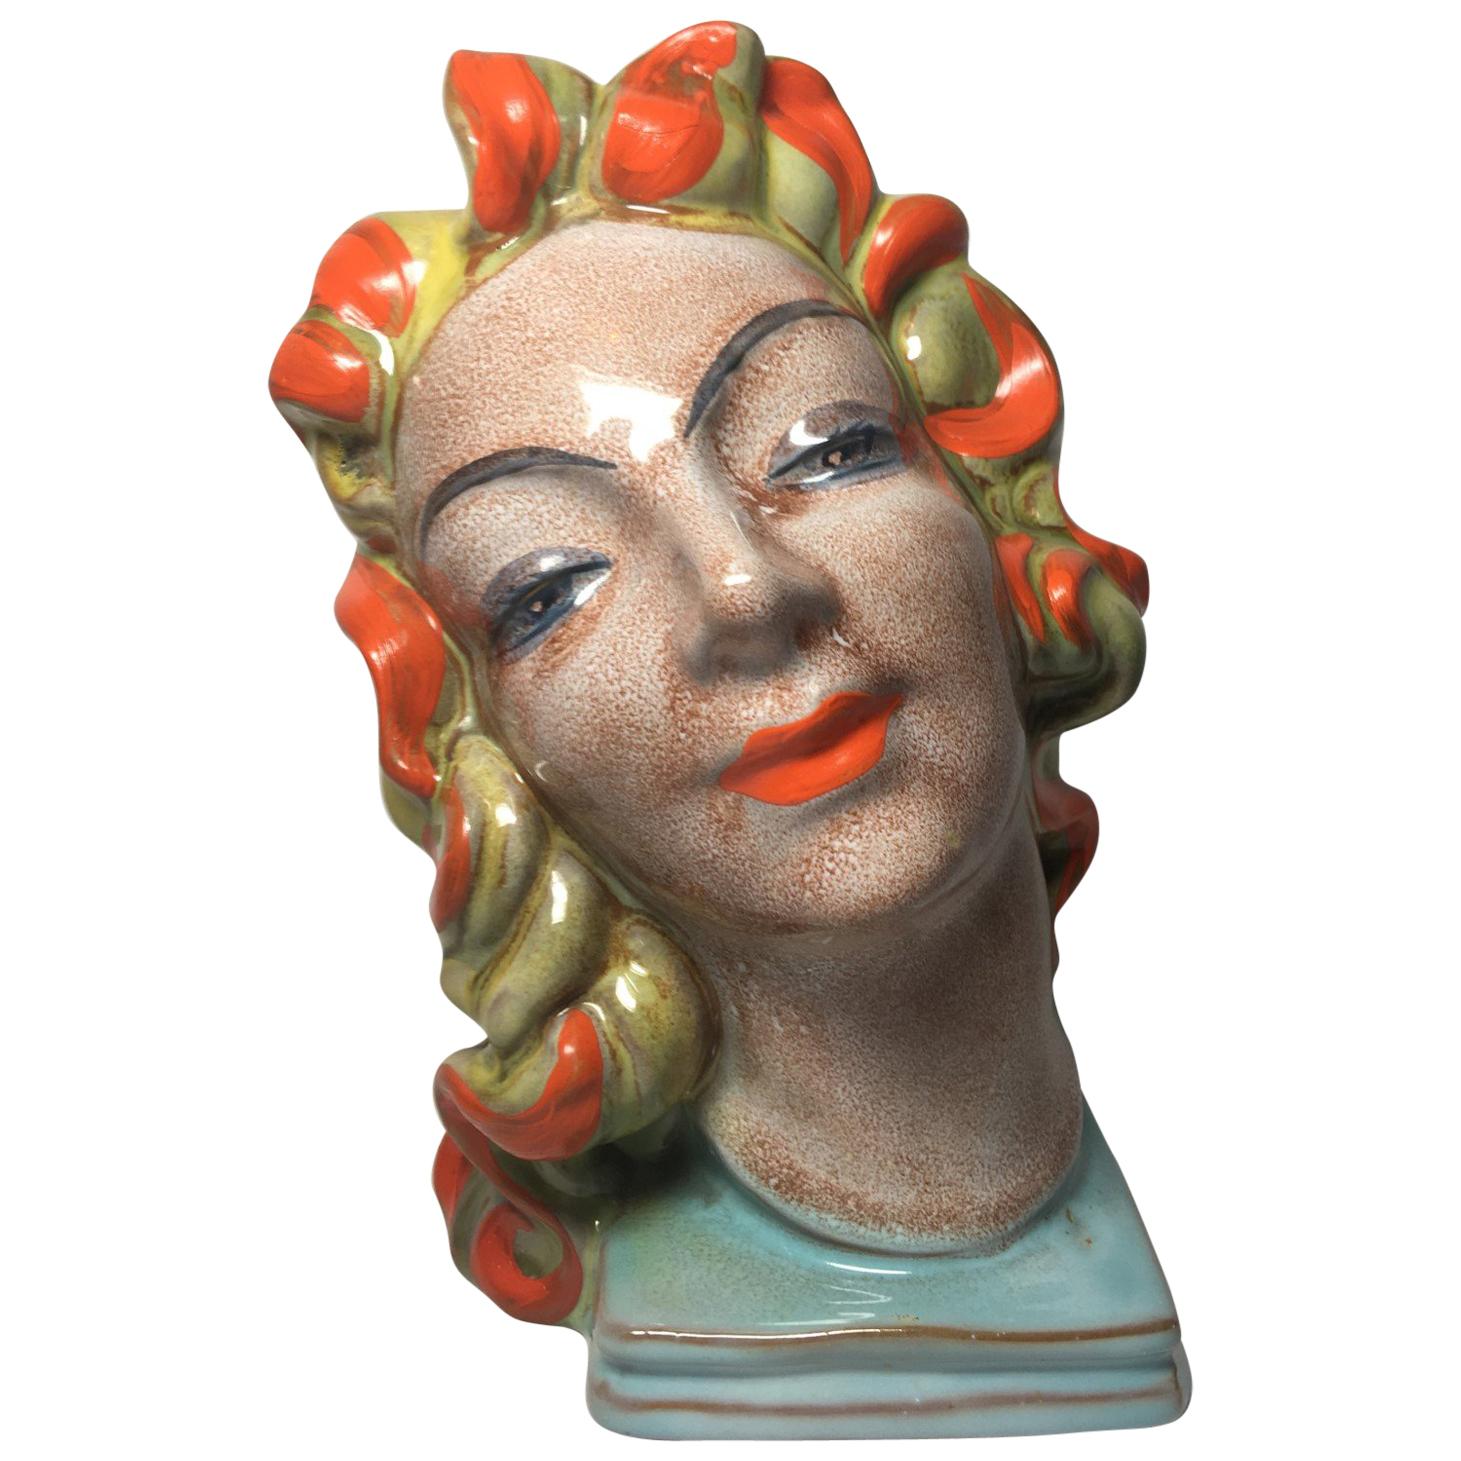 Expressive Art Deco Womans Ceramic Head from the Late 1930s Early 1940s For Sale